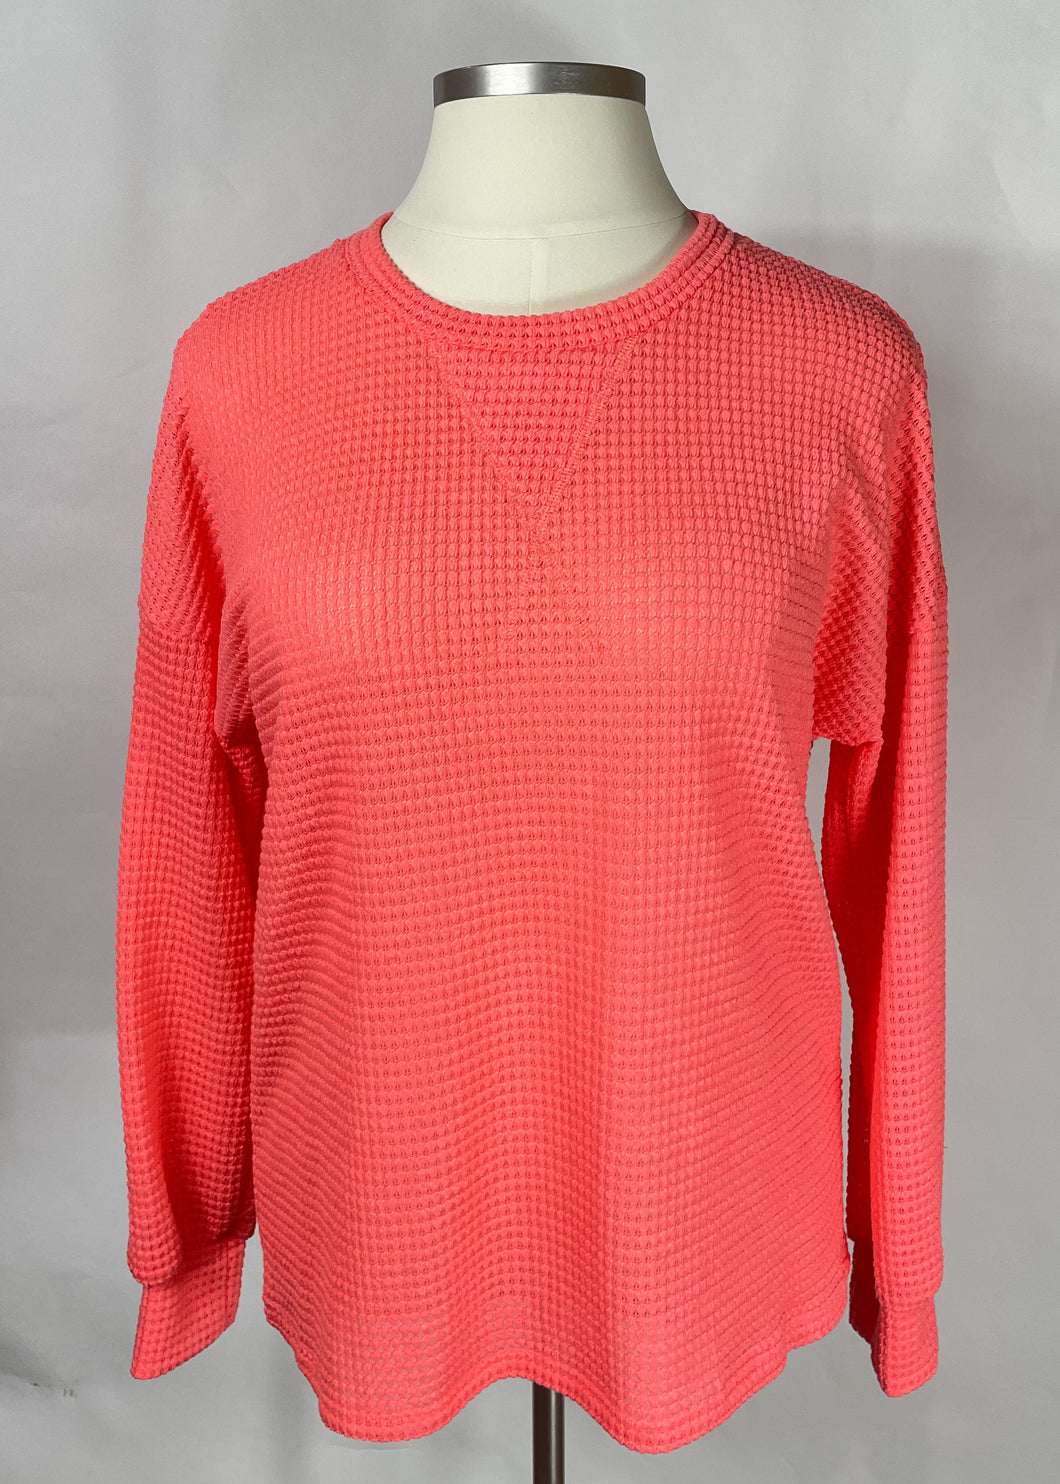 Coral Textured Top